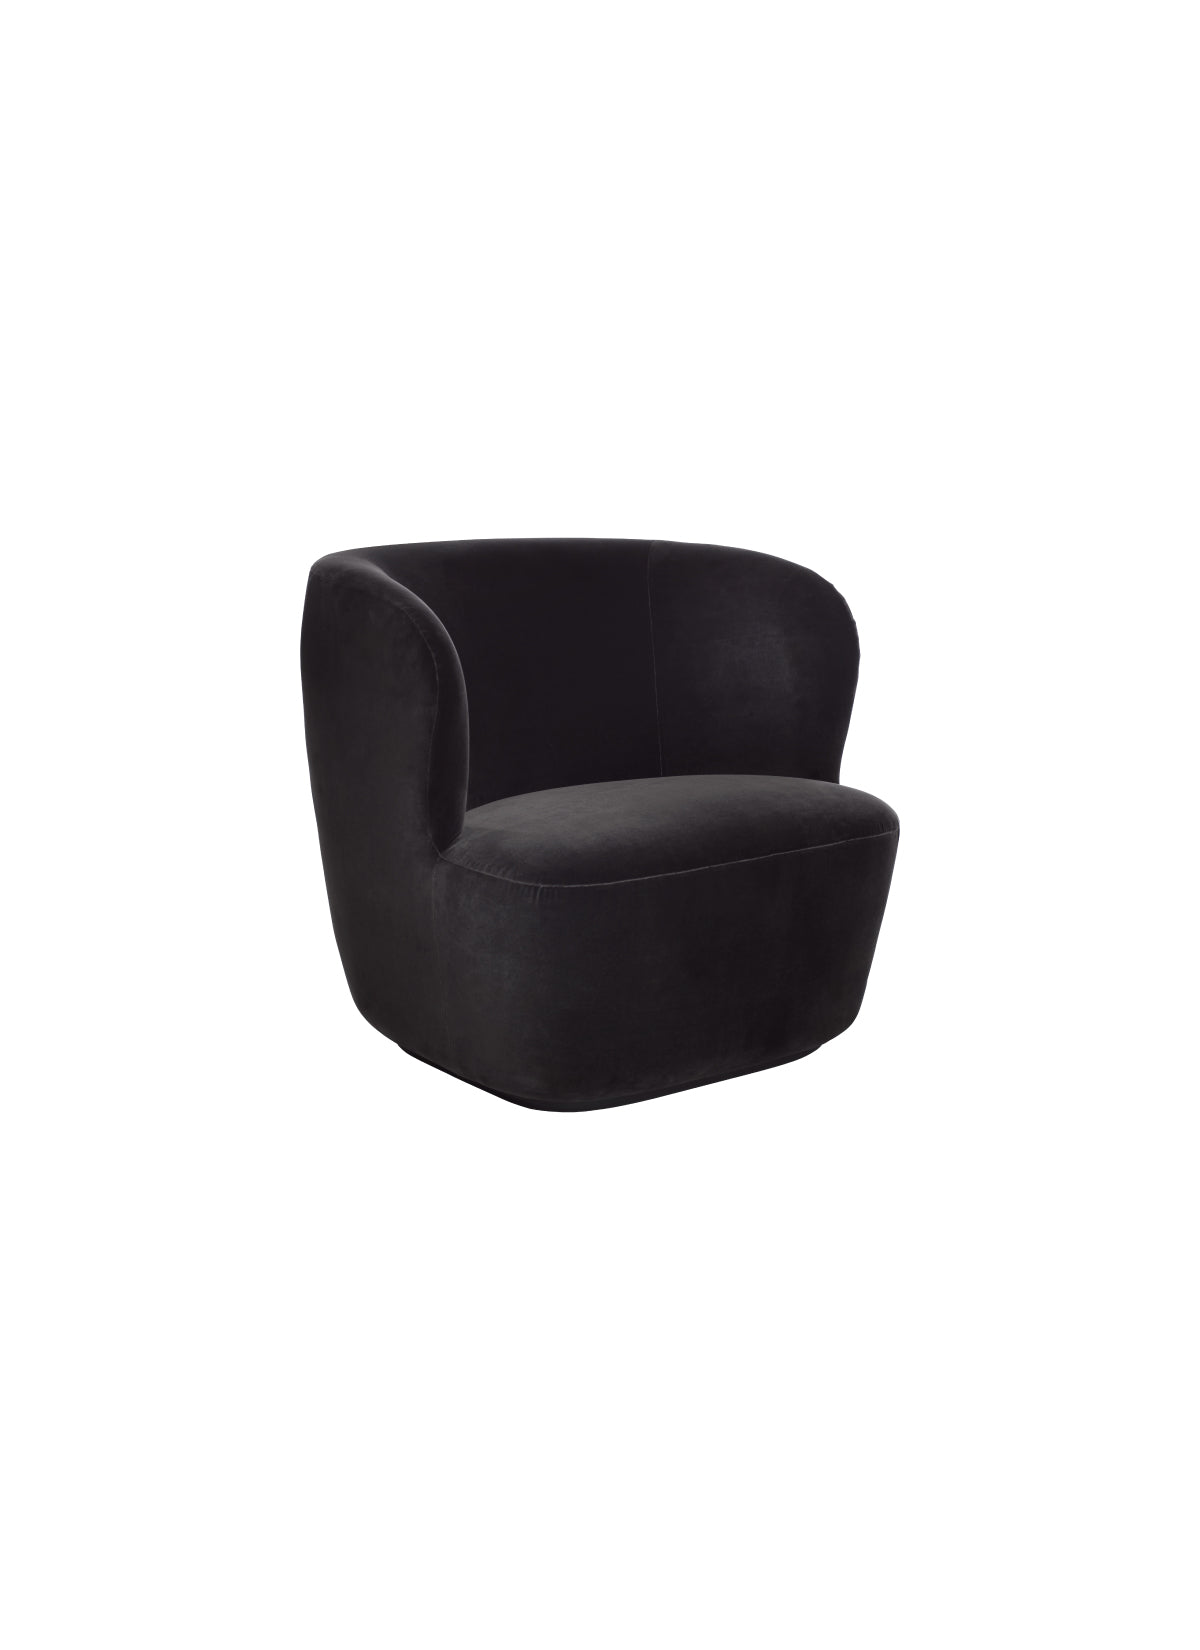 Stay Lounge Chair - Large - Black Base by Gubi